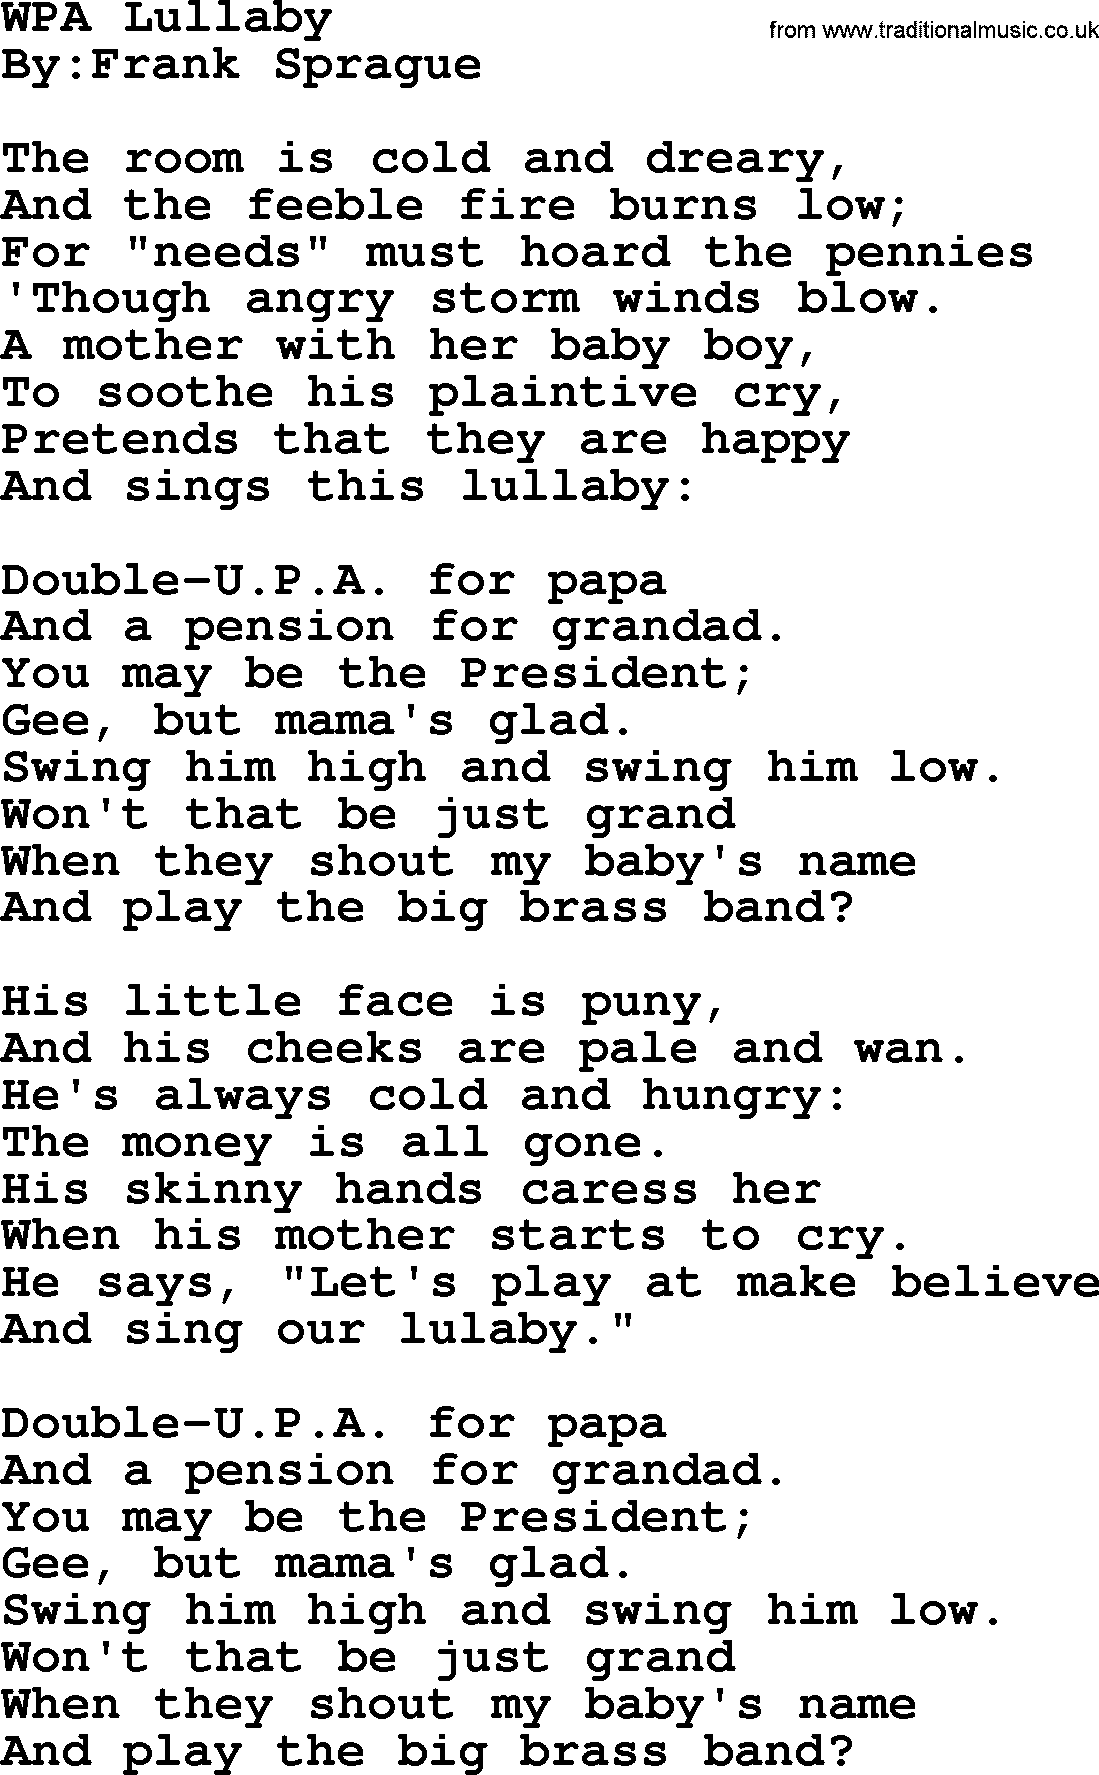 Political, Solidarity, Workers or Union song: Wpa Lullaby, lyrics